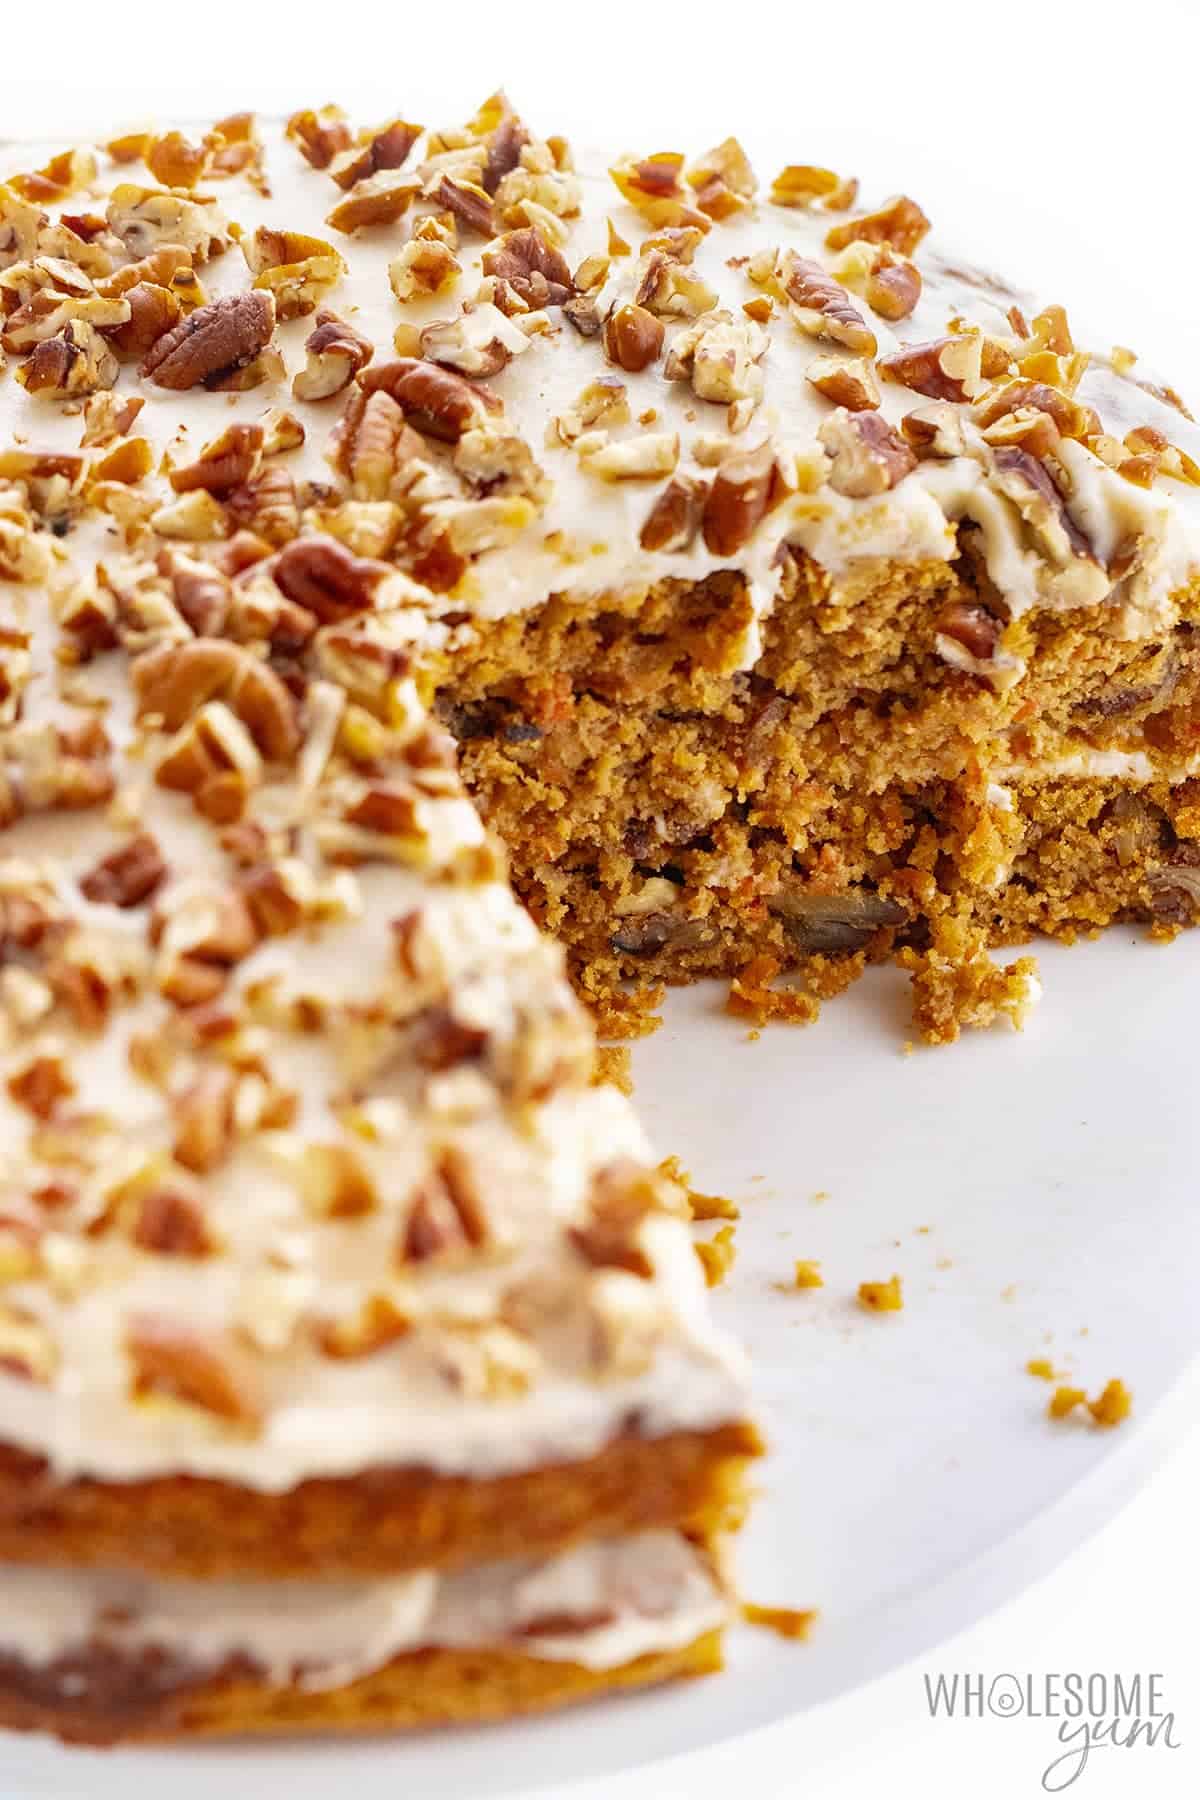 Sugar-free low carb carrot cake with a few slices removed.